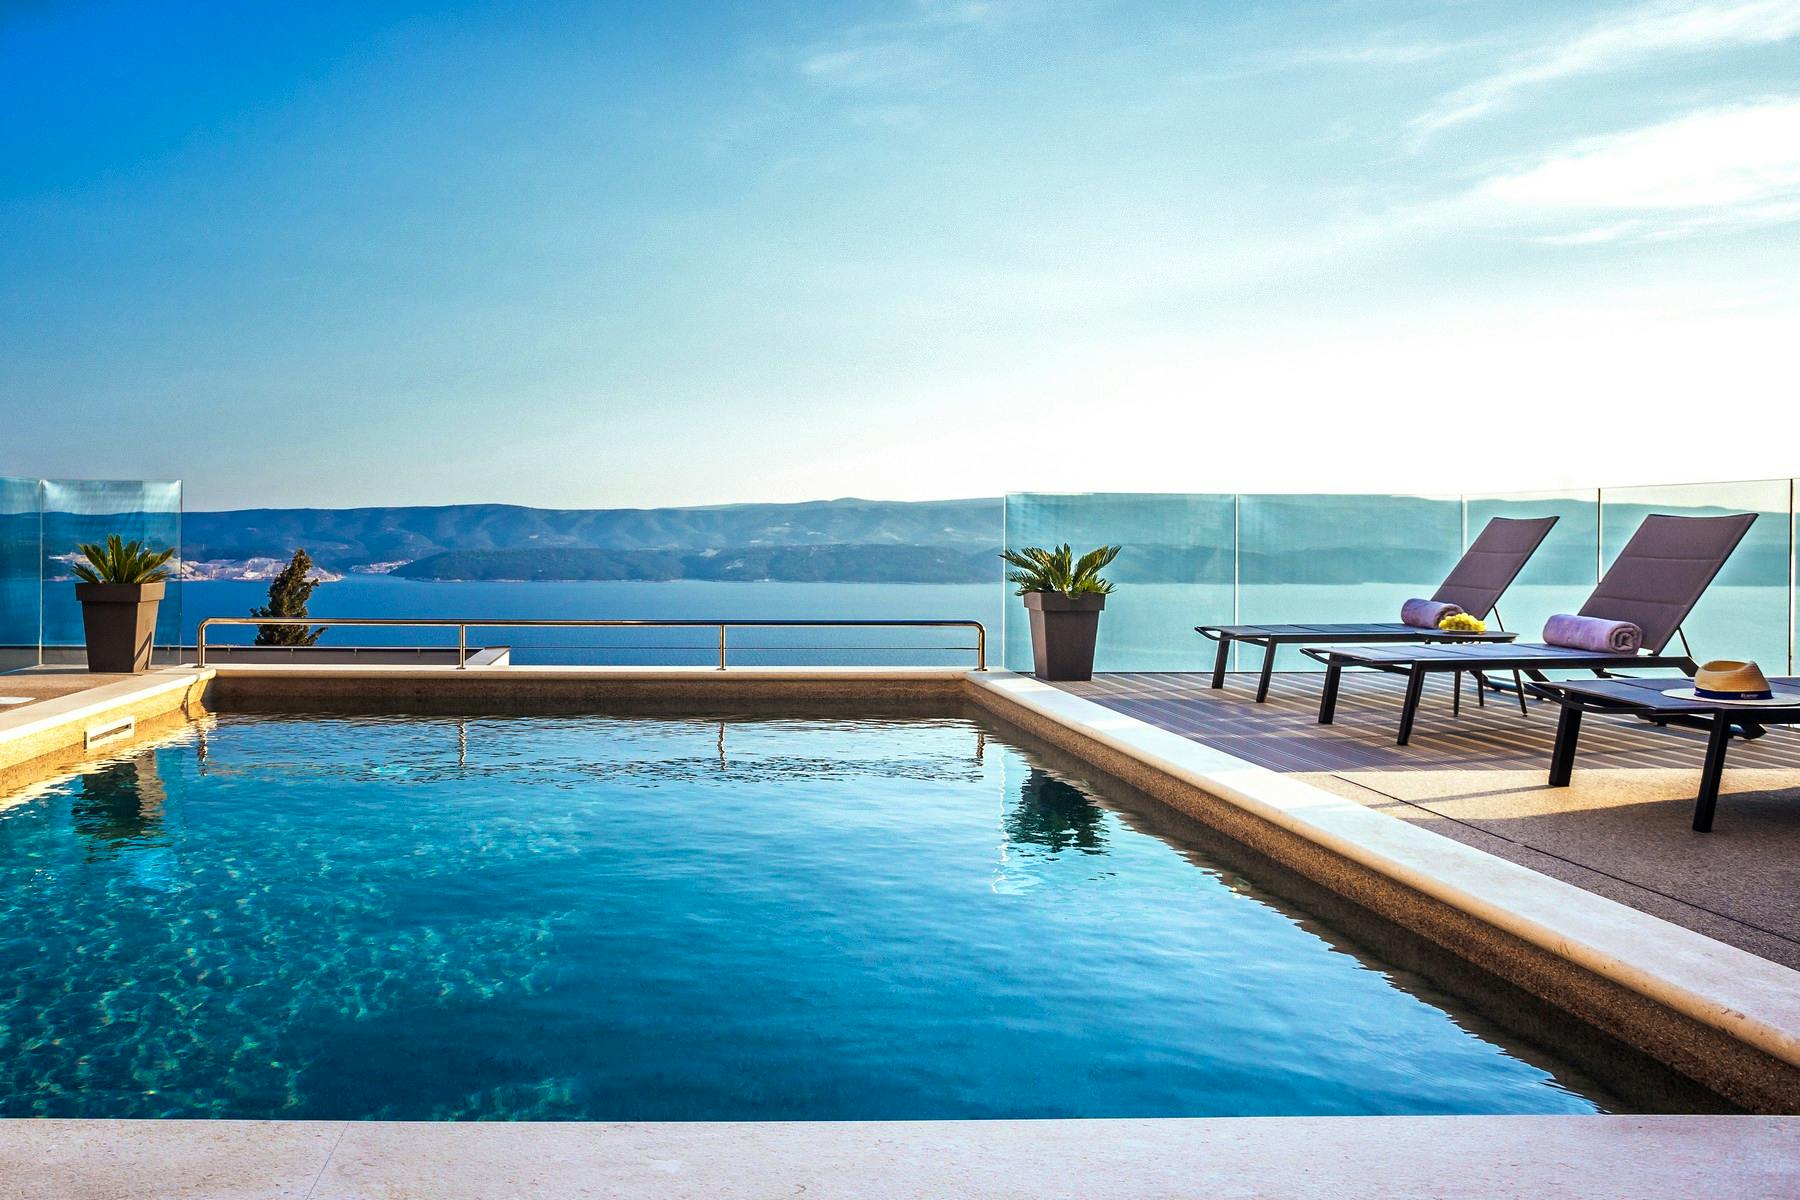 Stunning sea view from the pool terrace